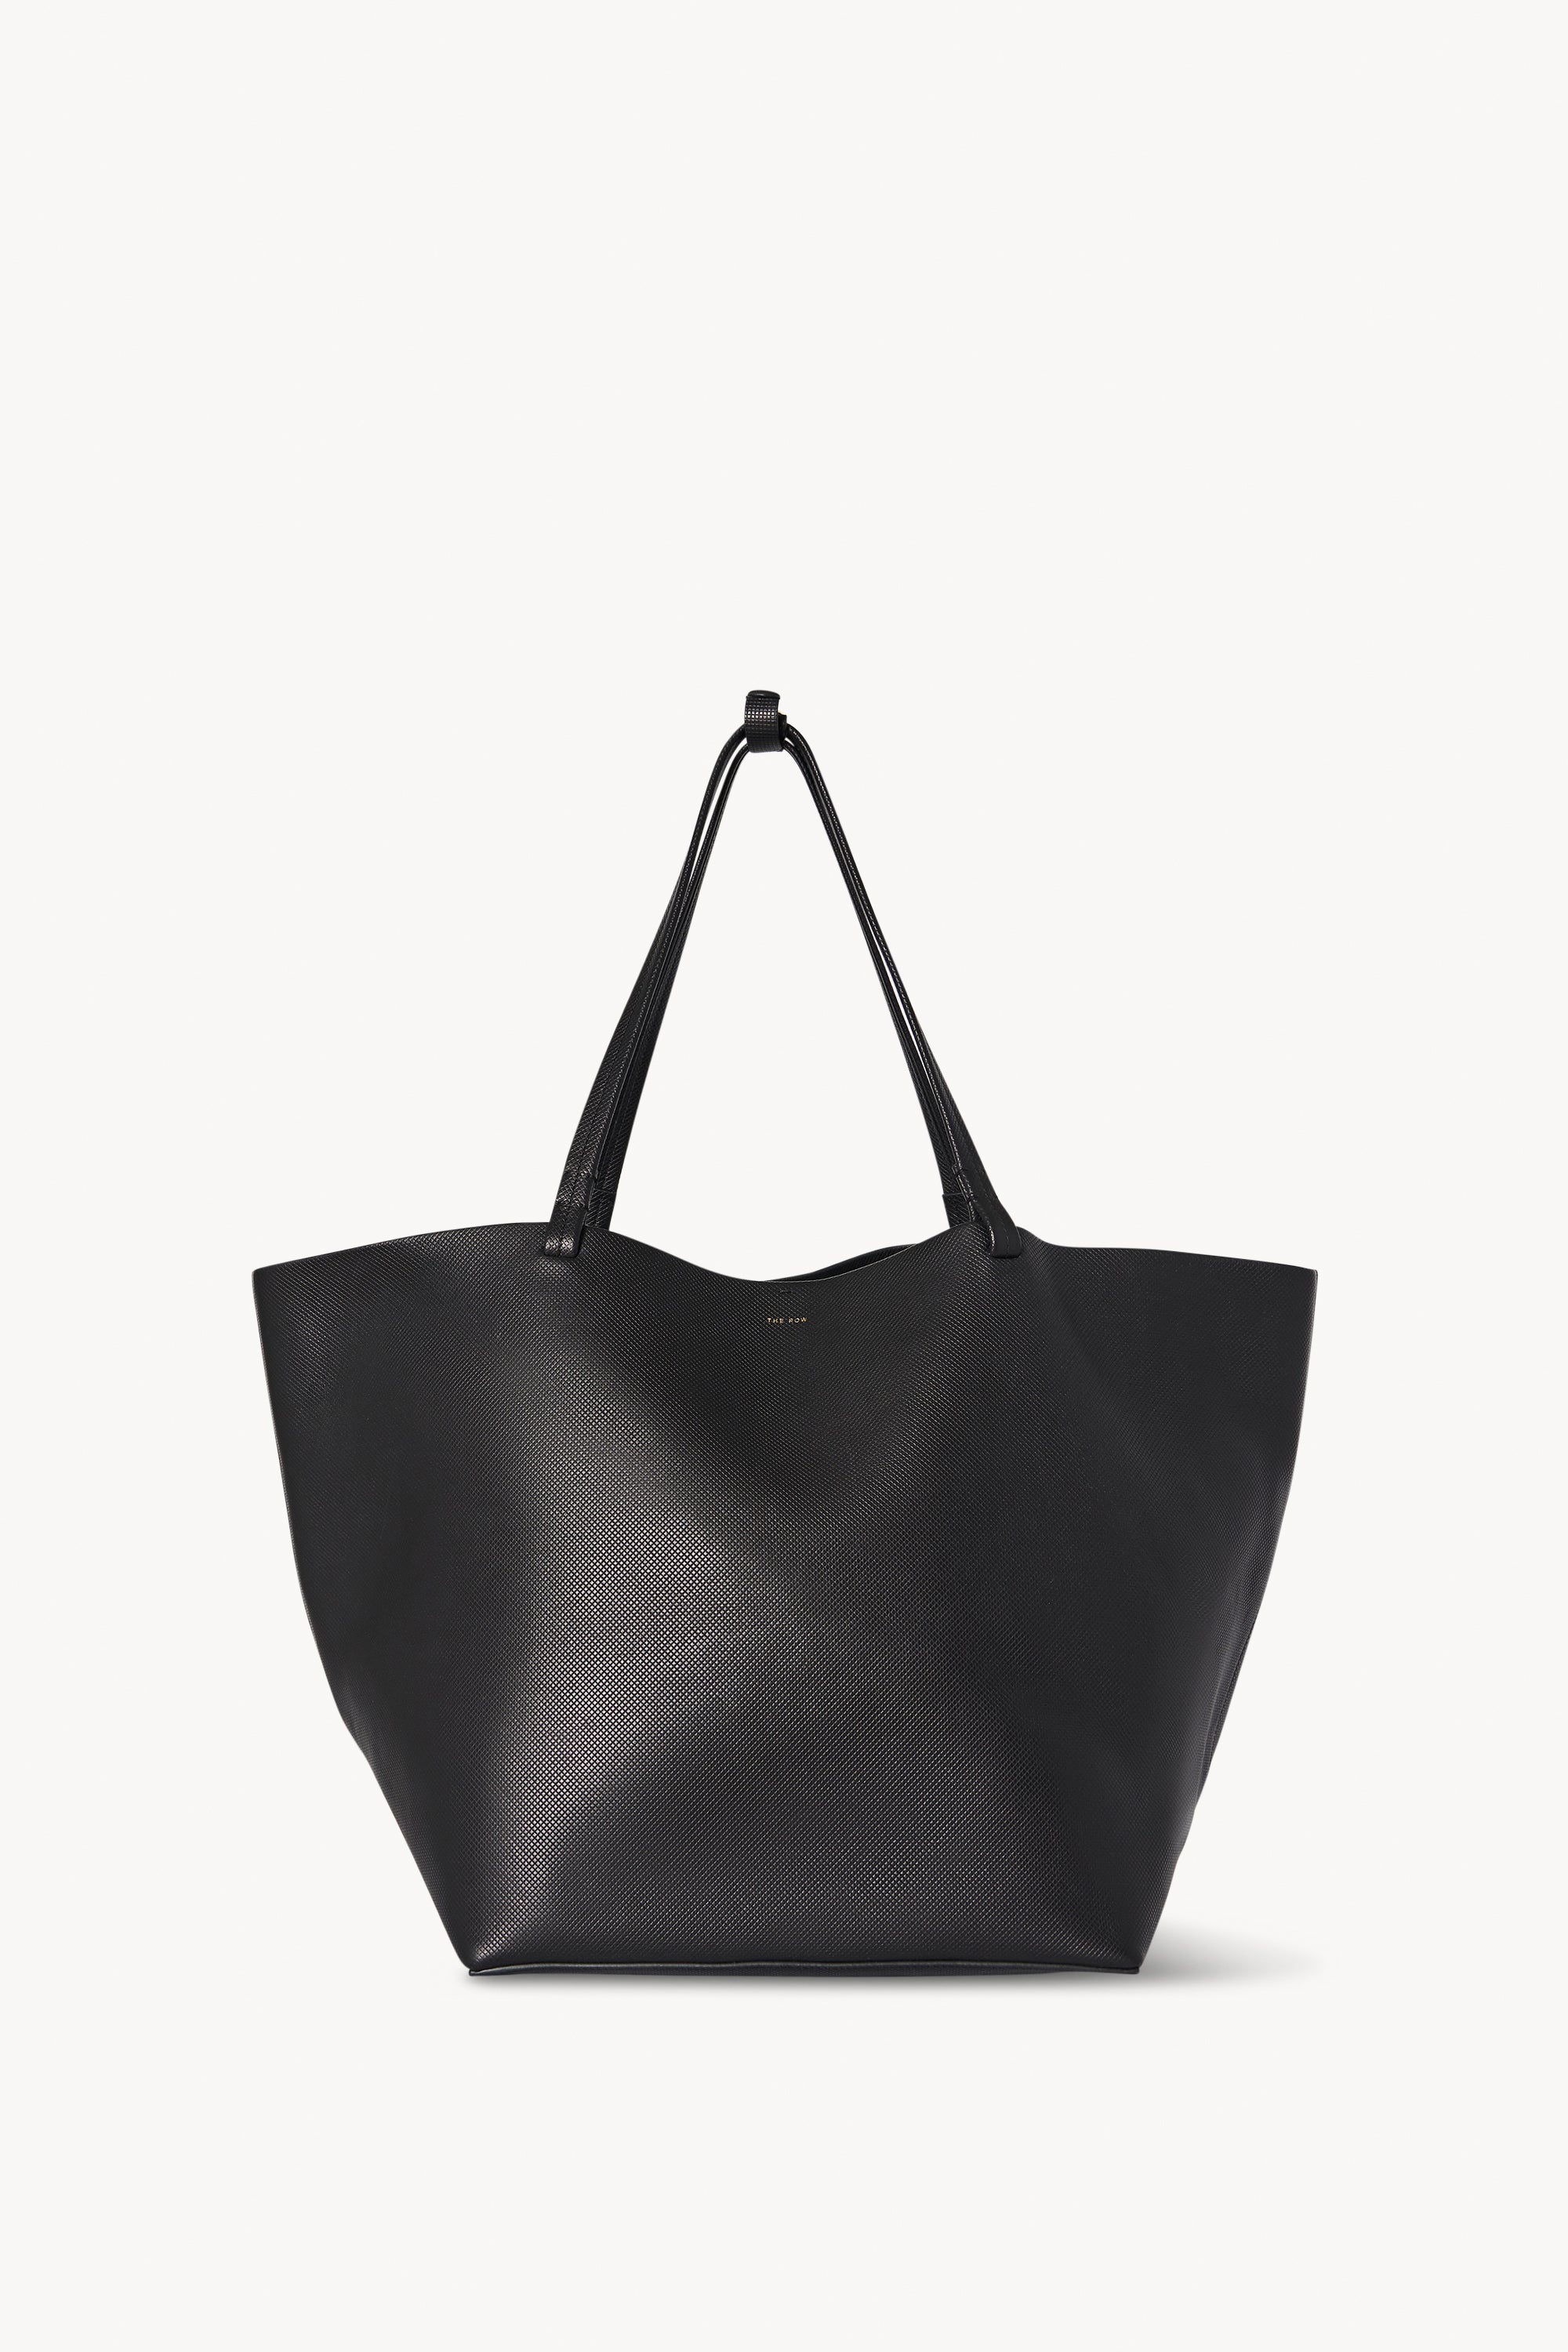 The Row Park Tote Three Bag in Leather | REVERSIBLE